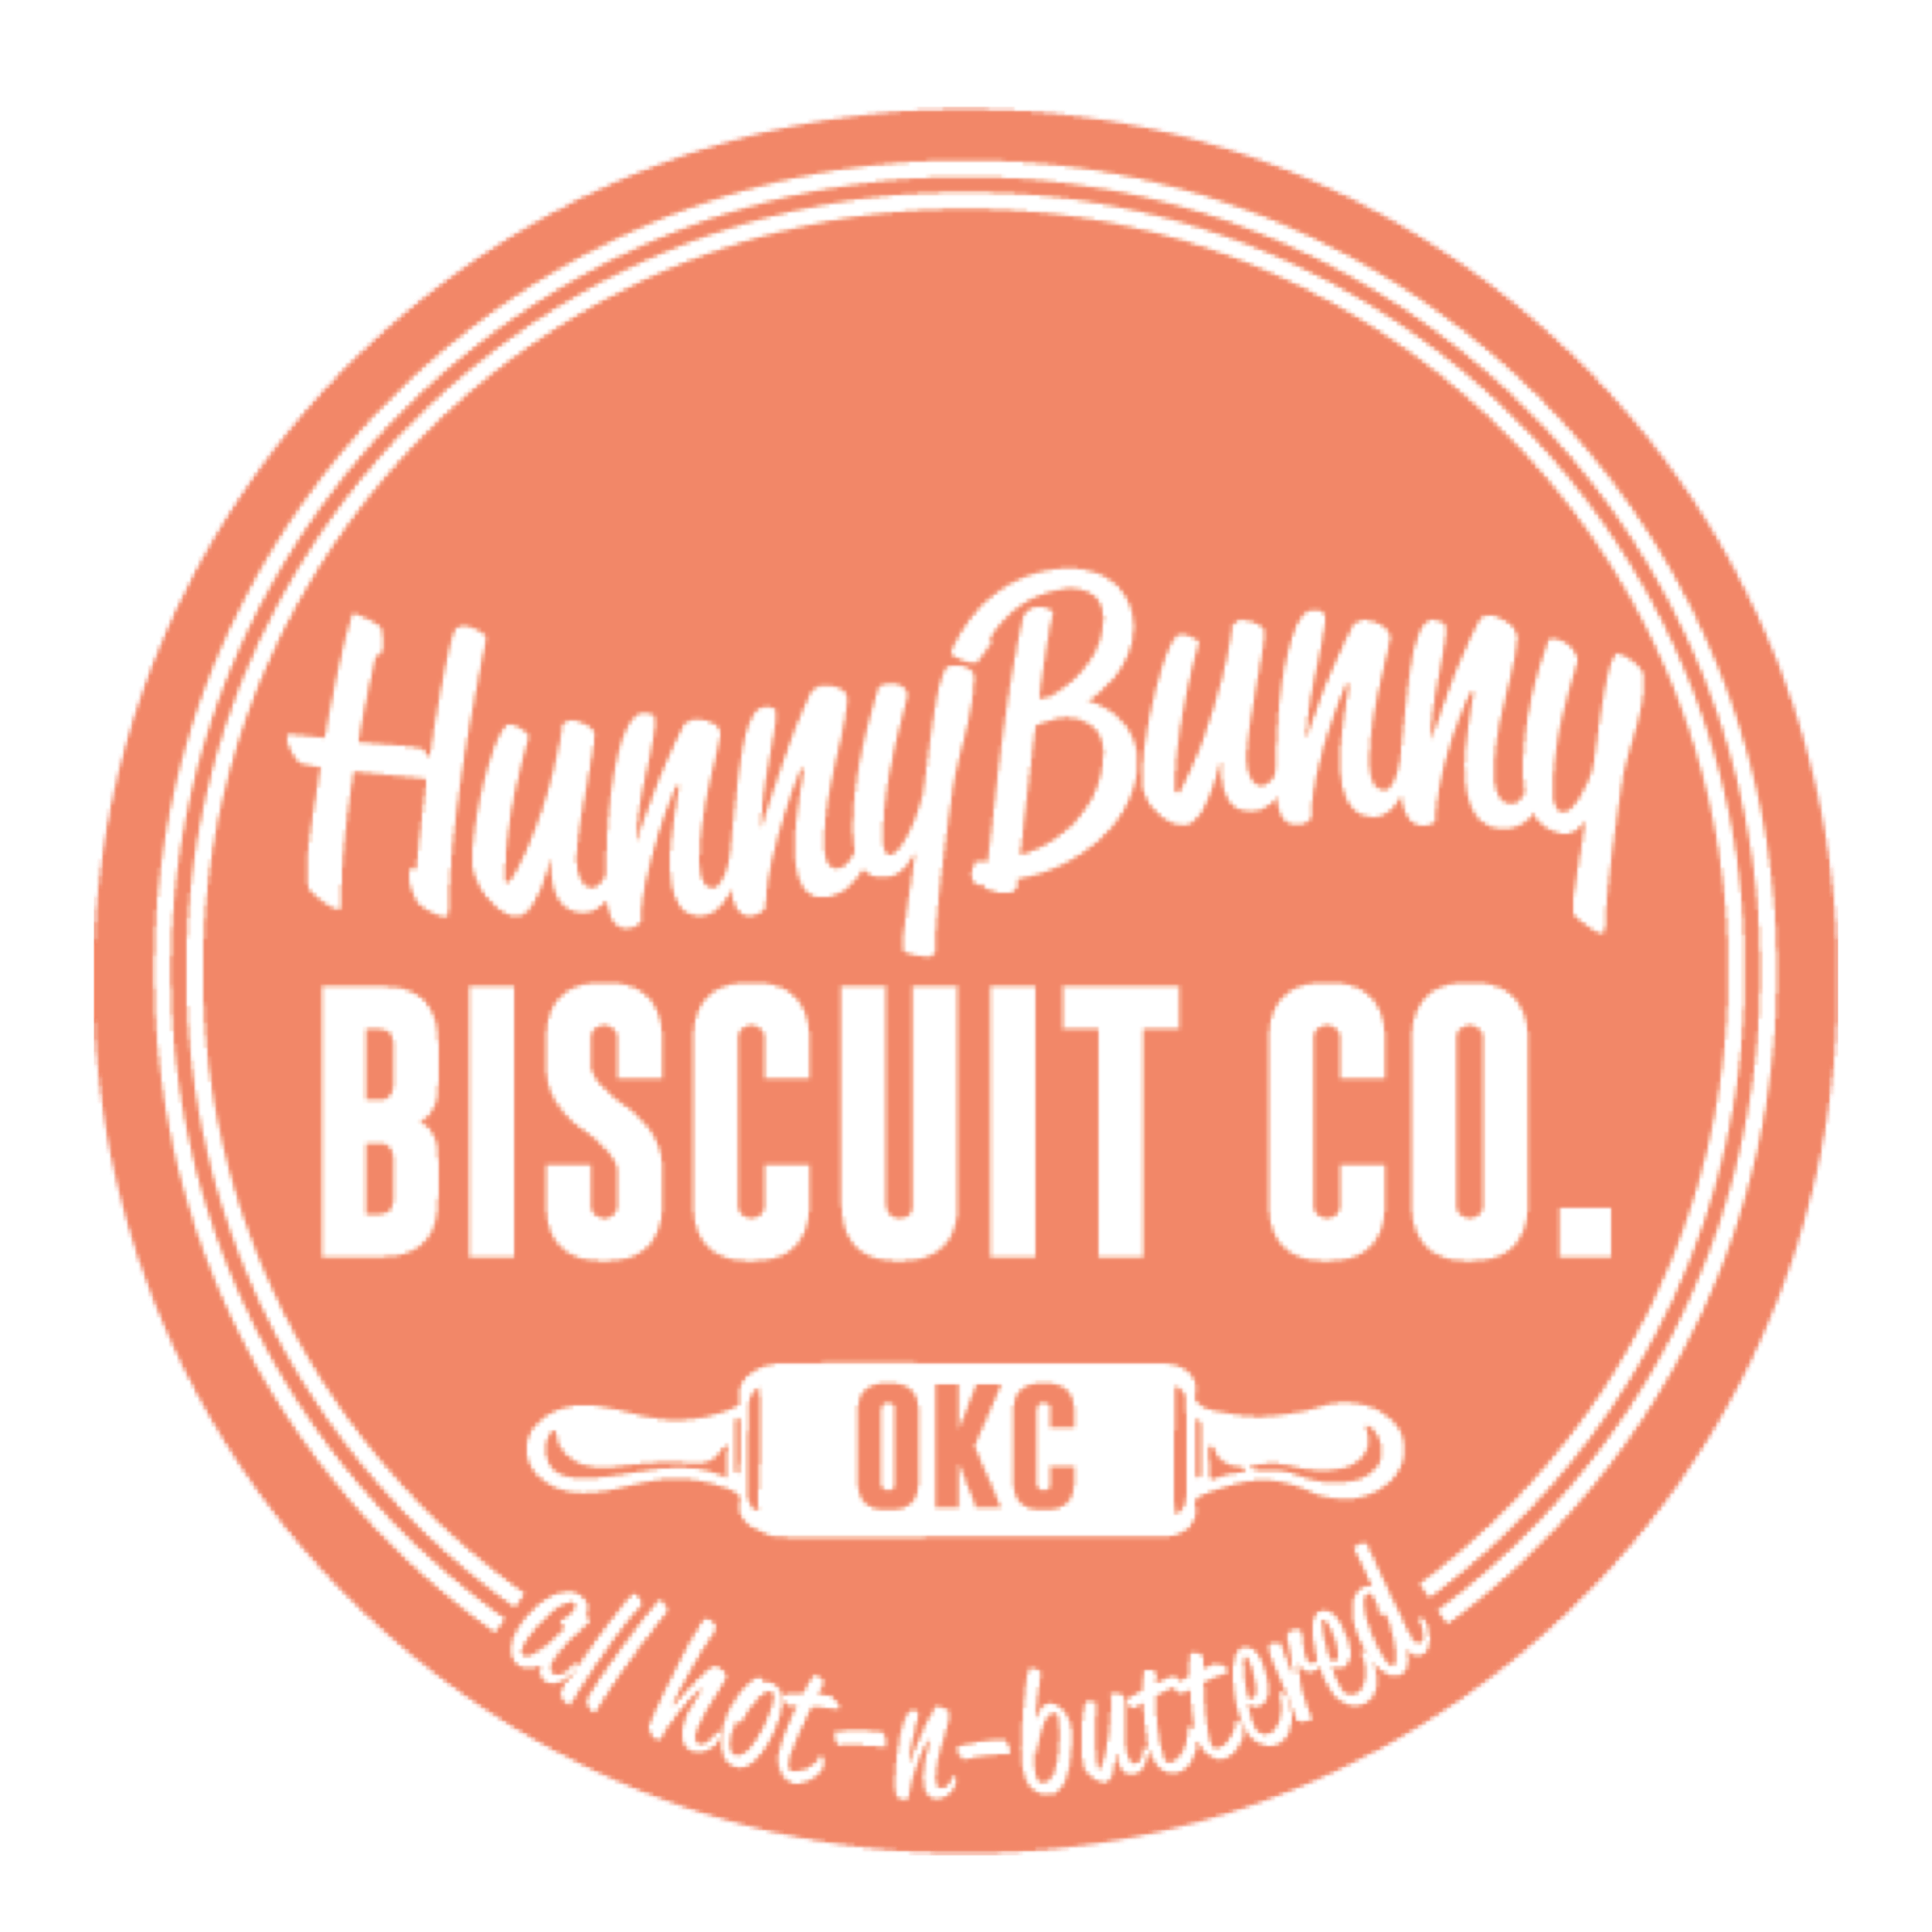 HunnyBunny Biscuit Co. Locations Oklahoma City, 23rd St, Memorial and  MacArthur, Edmond W Covell